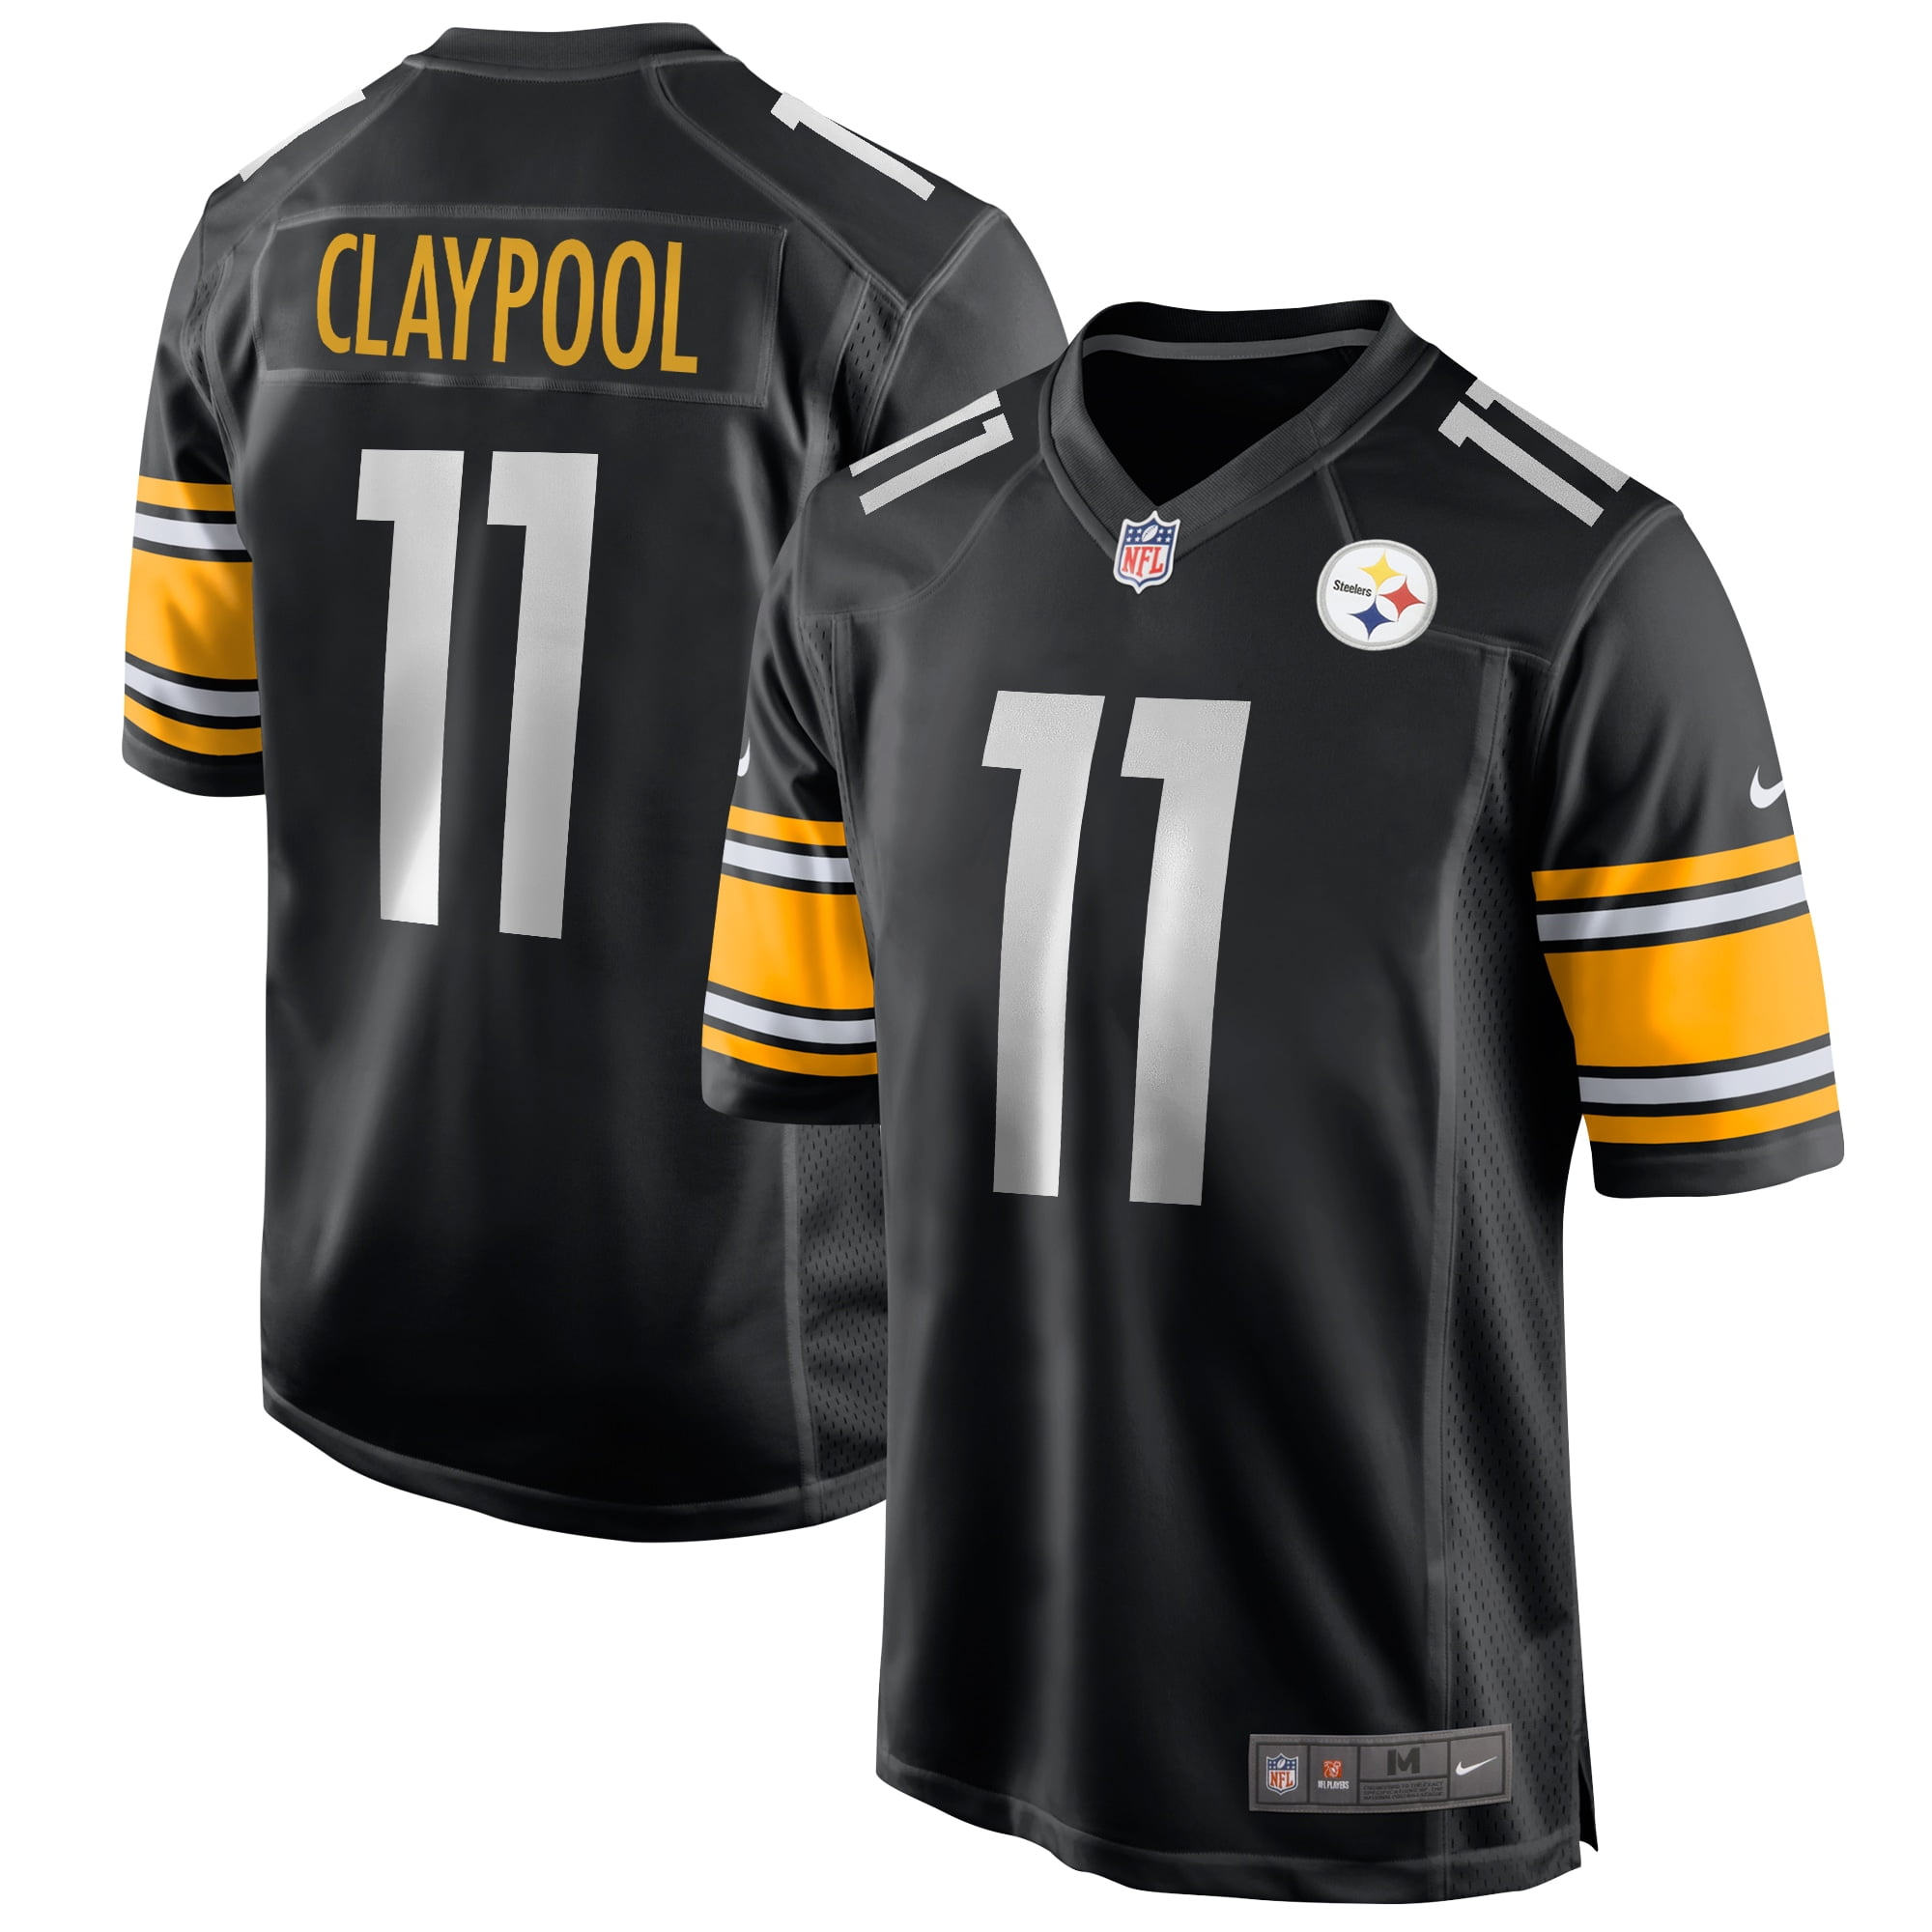 Claypool #11 Steelers Mens American Football Jersey， Game Sportswear Rugby Jersey Student Training Wear Embroidery